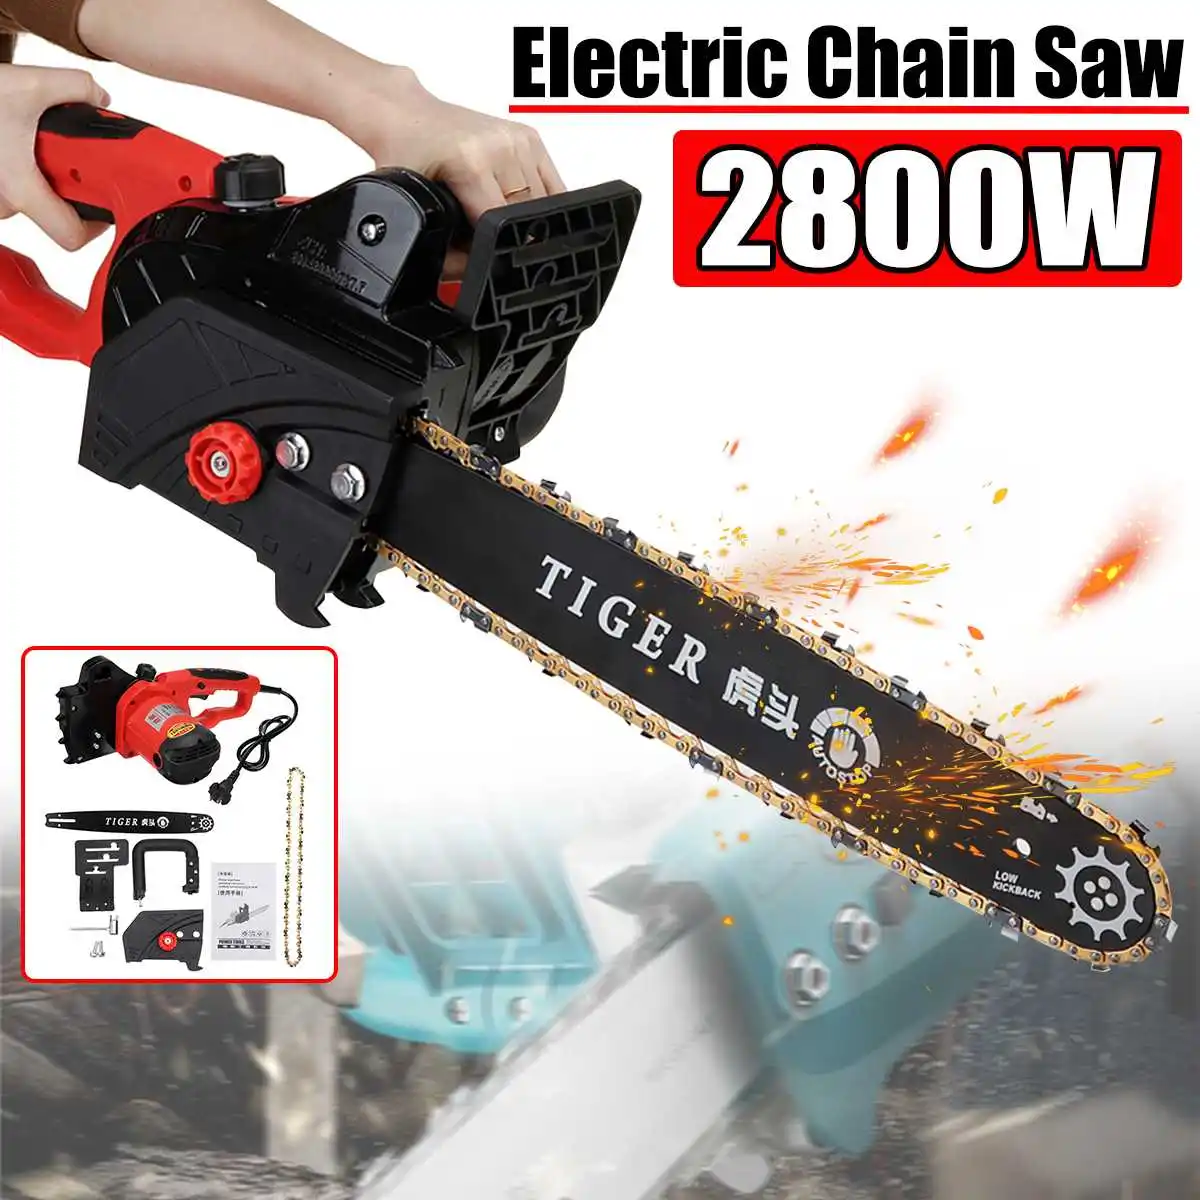 

2800W Electric Chain Saw 220V Electric Chainsaw Semi-automatic Injection Electric Saw Woodworking Machinery Power Garden Tools